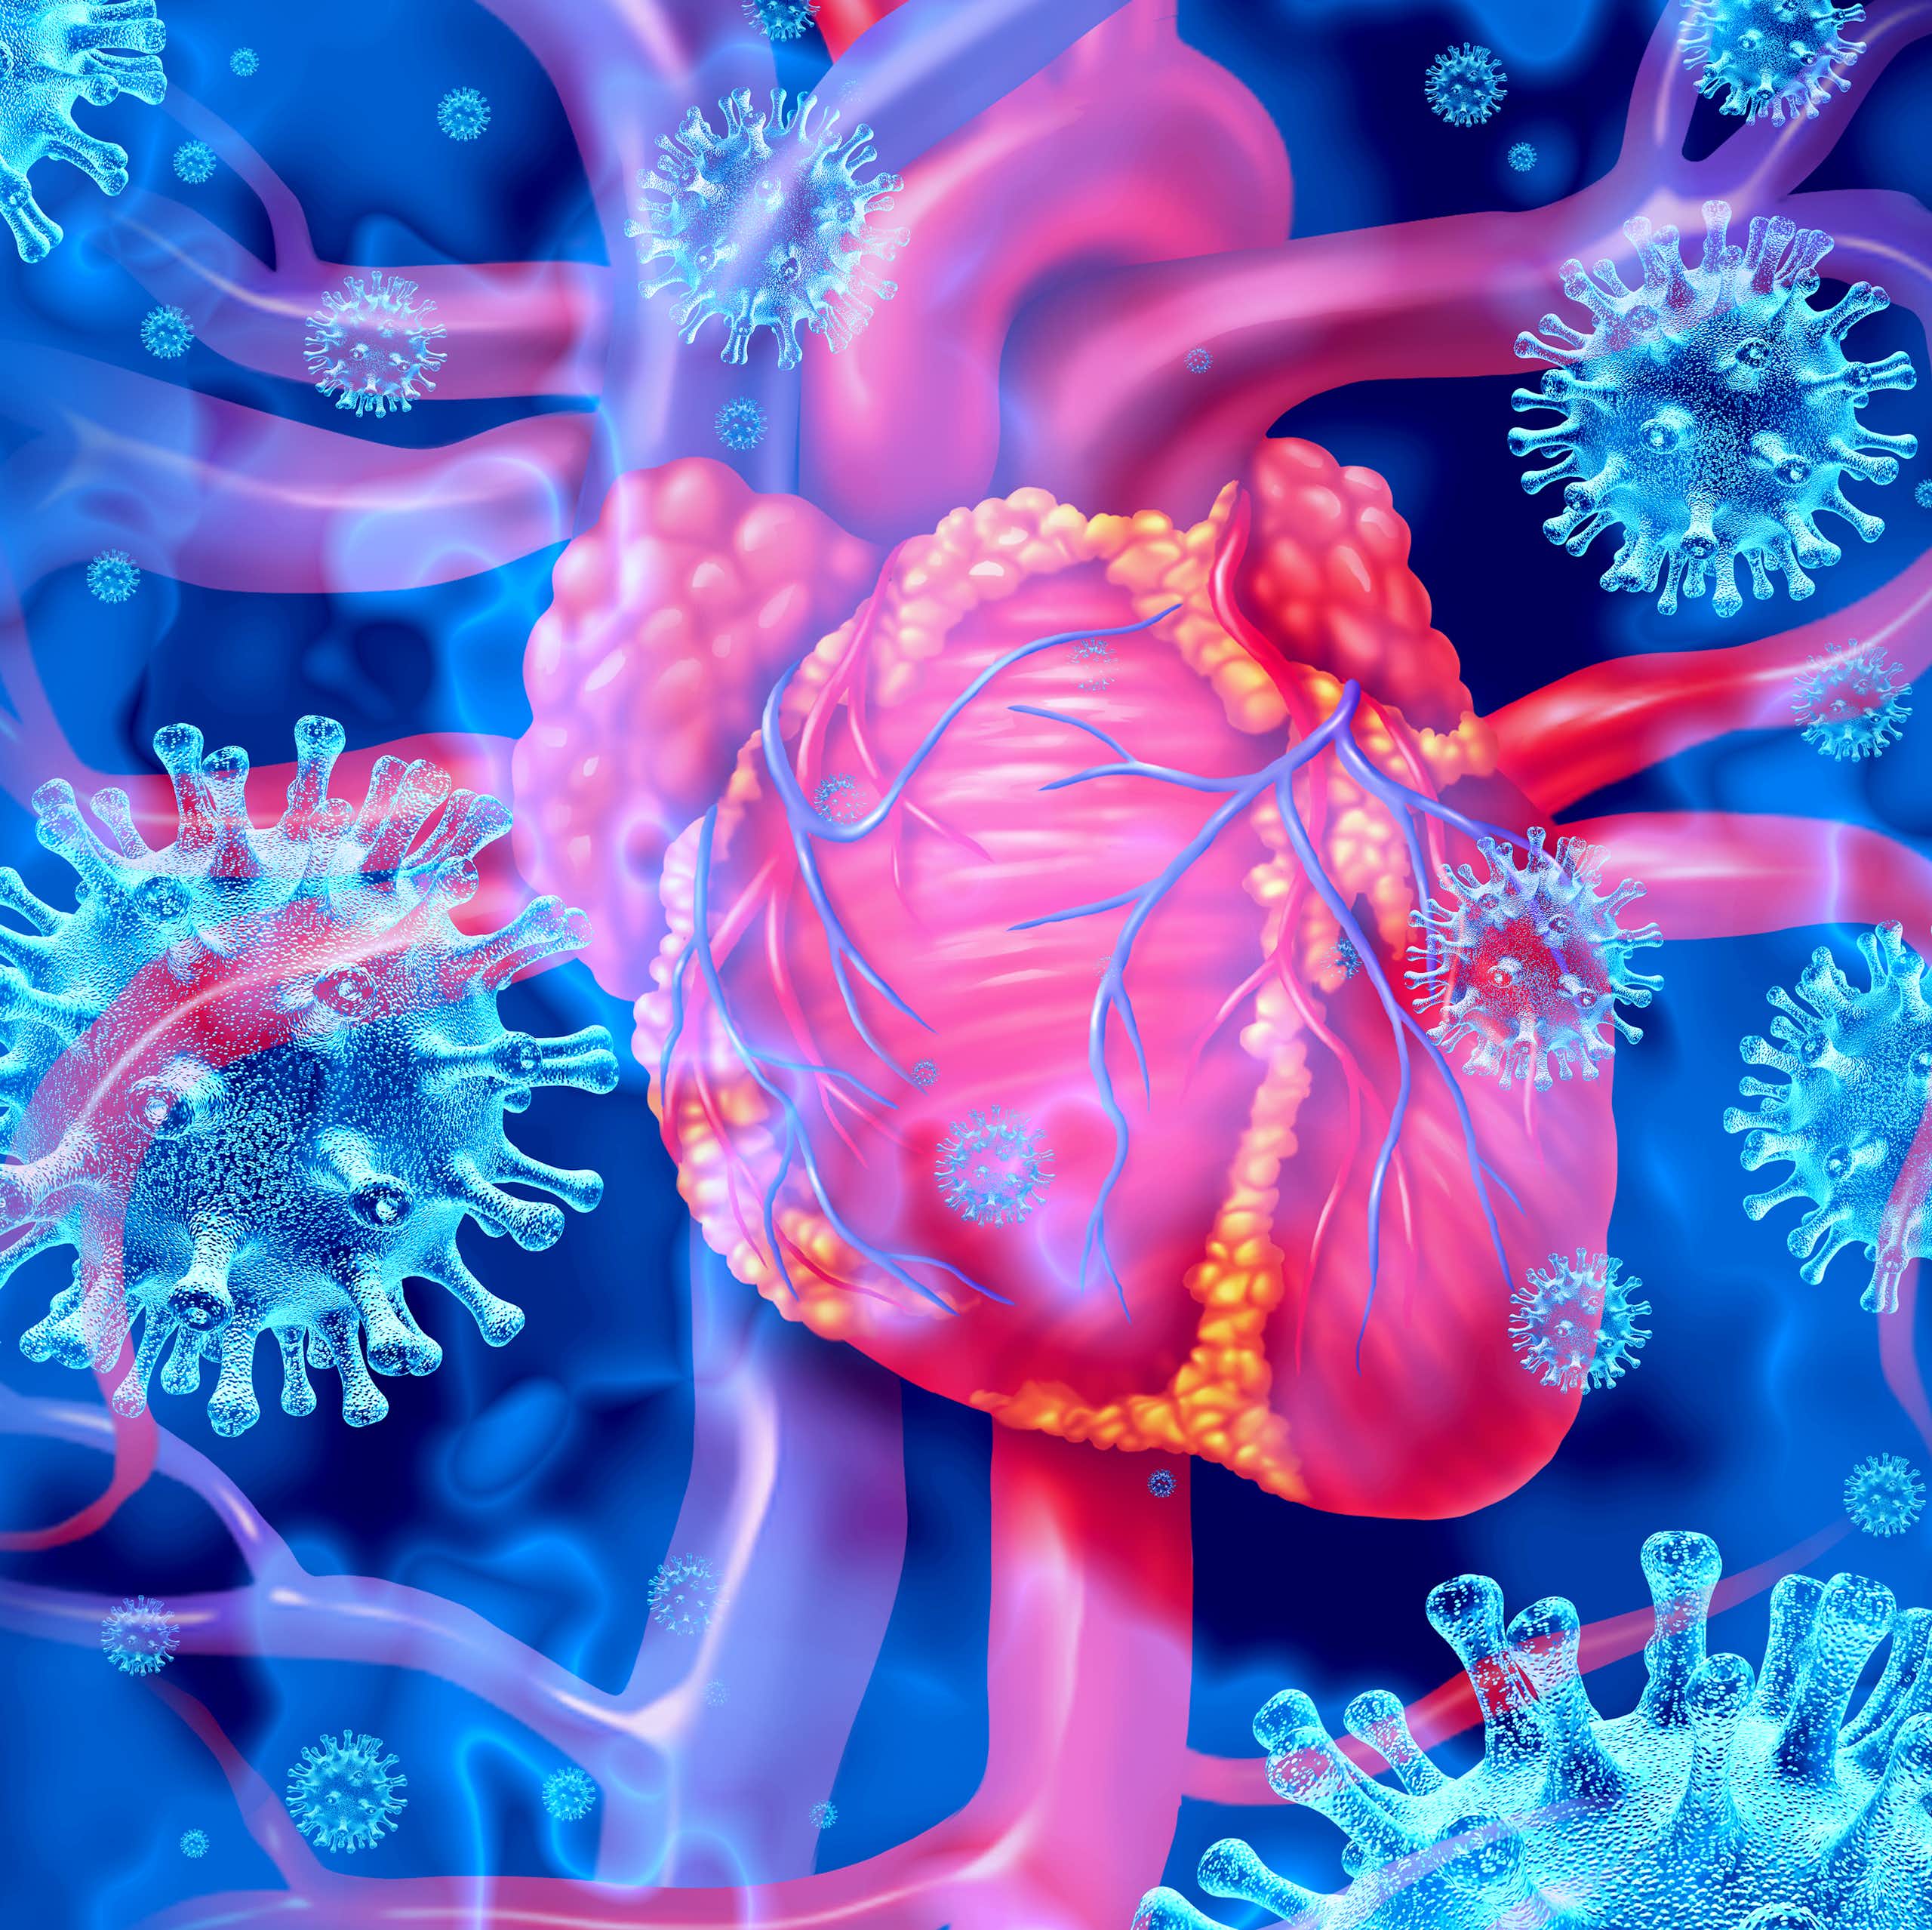 Three-dimensional rendering of a heart with inflammation from viral myocarditis, against a background of COVID-19 viral particles.